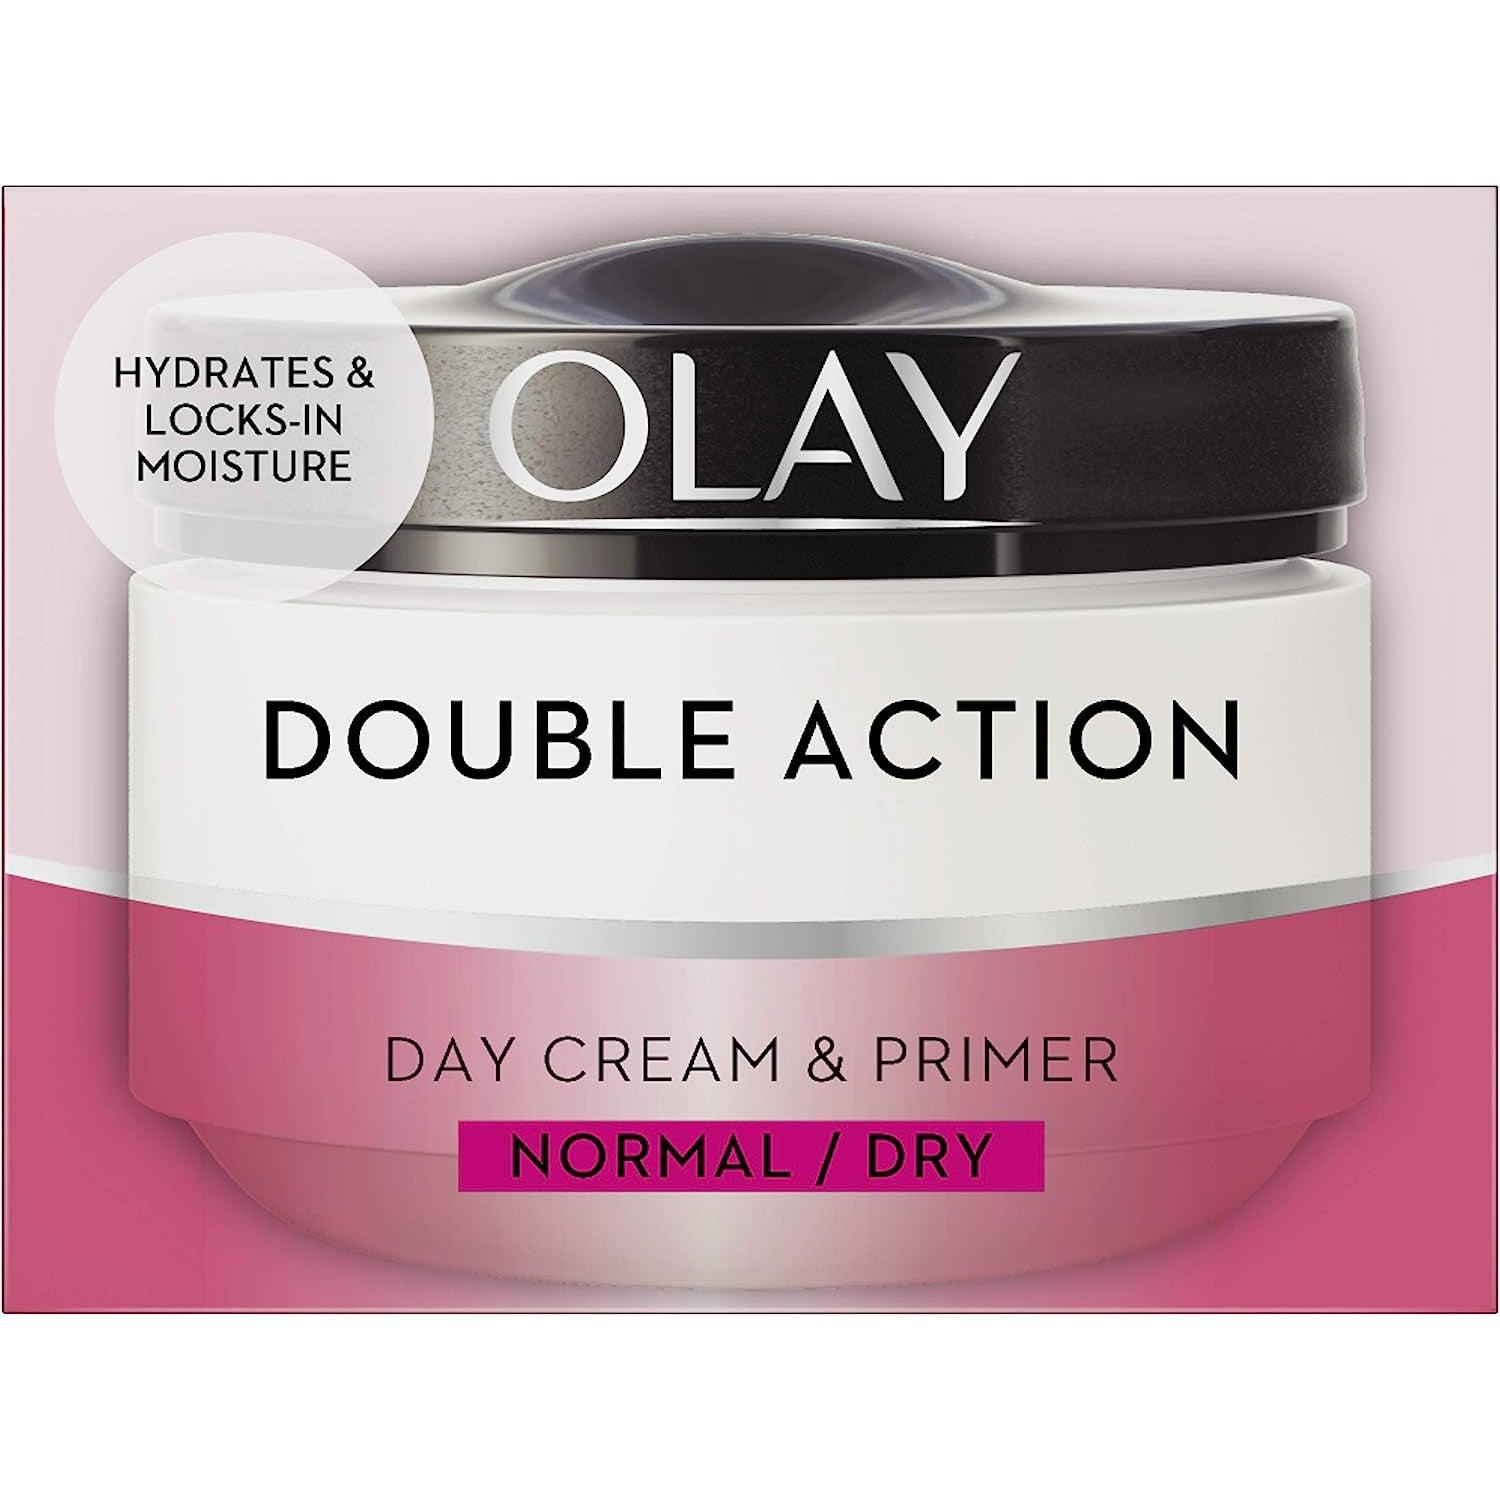 Olay Double Action Day Cream & Primer Normal/Dry, 50ml - Healthxpress.ie